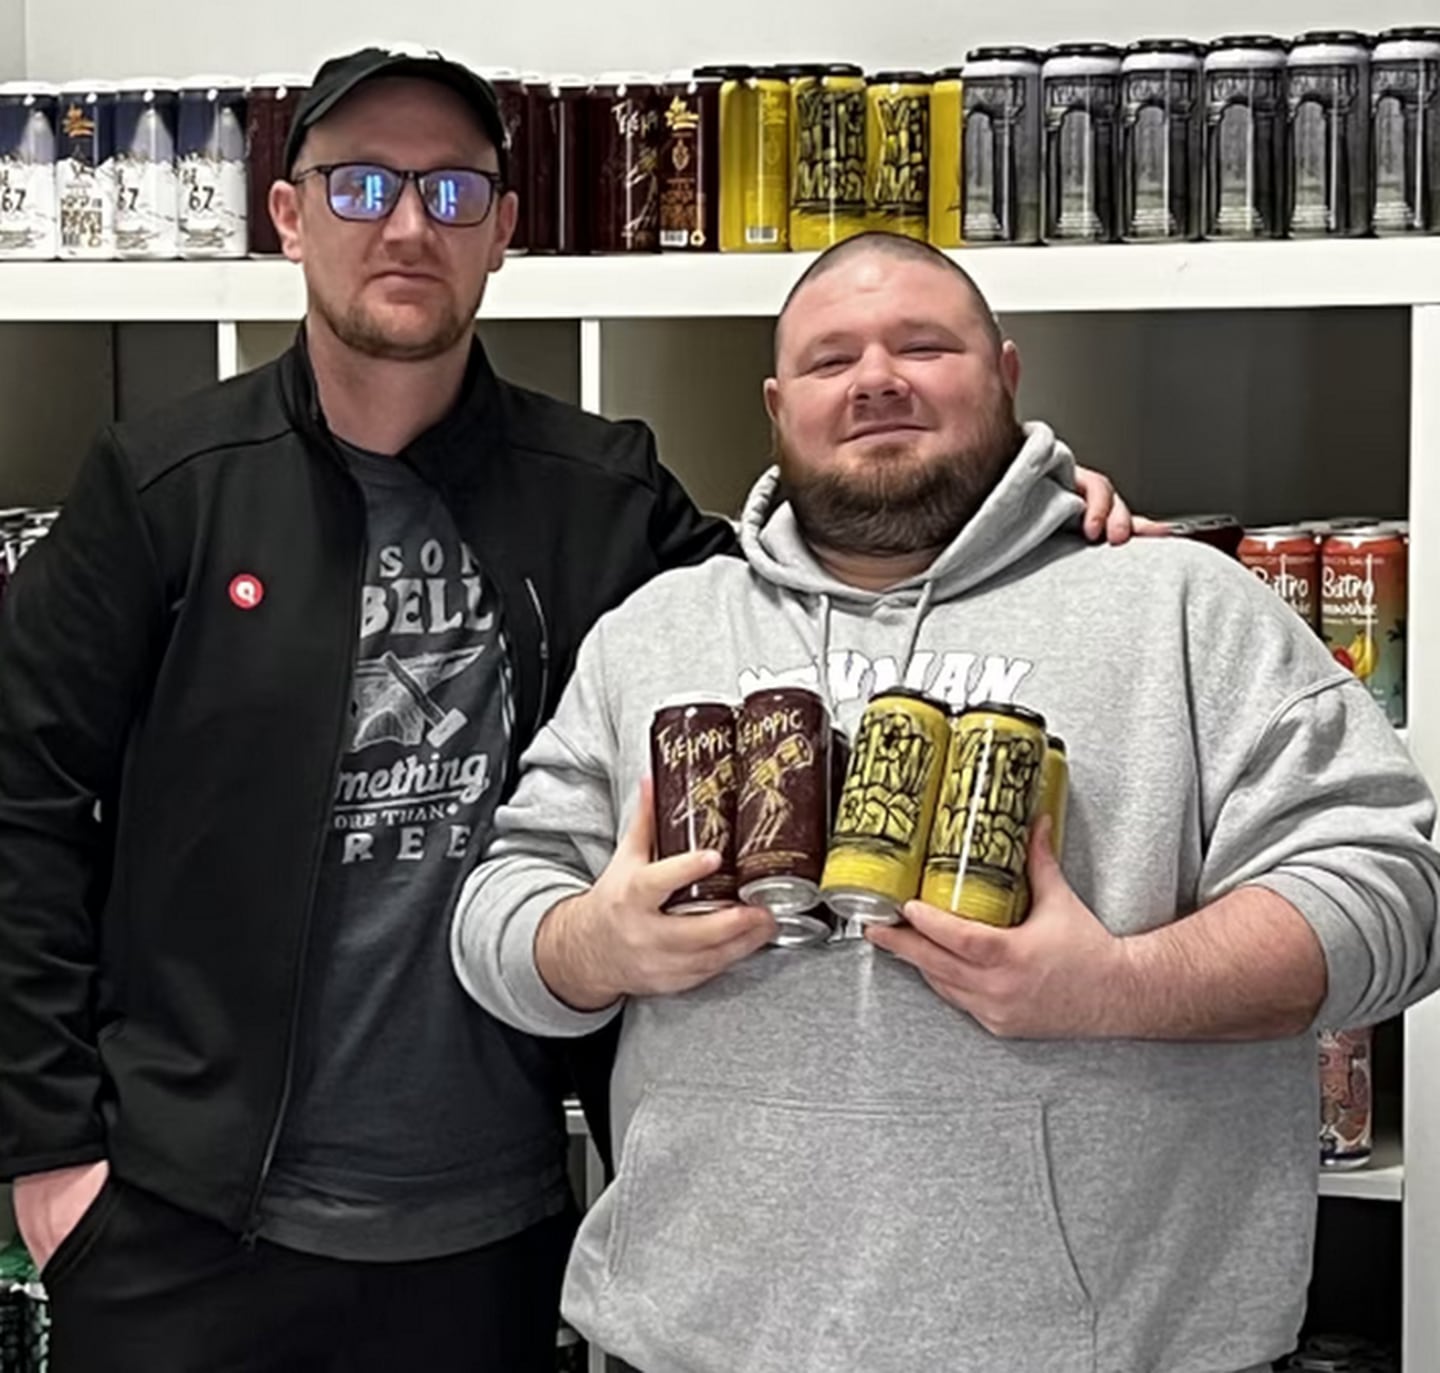 Crafted Roots owners Goff Devine, left, and Brandon McDaniel opened their craft beer bottle shop Jan. 6, 2023, at 312 Light St. in downtown Sterling.